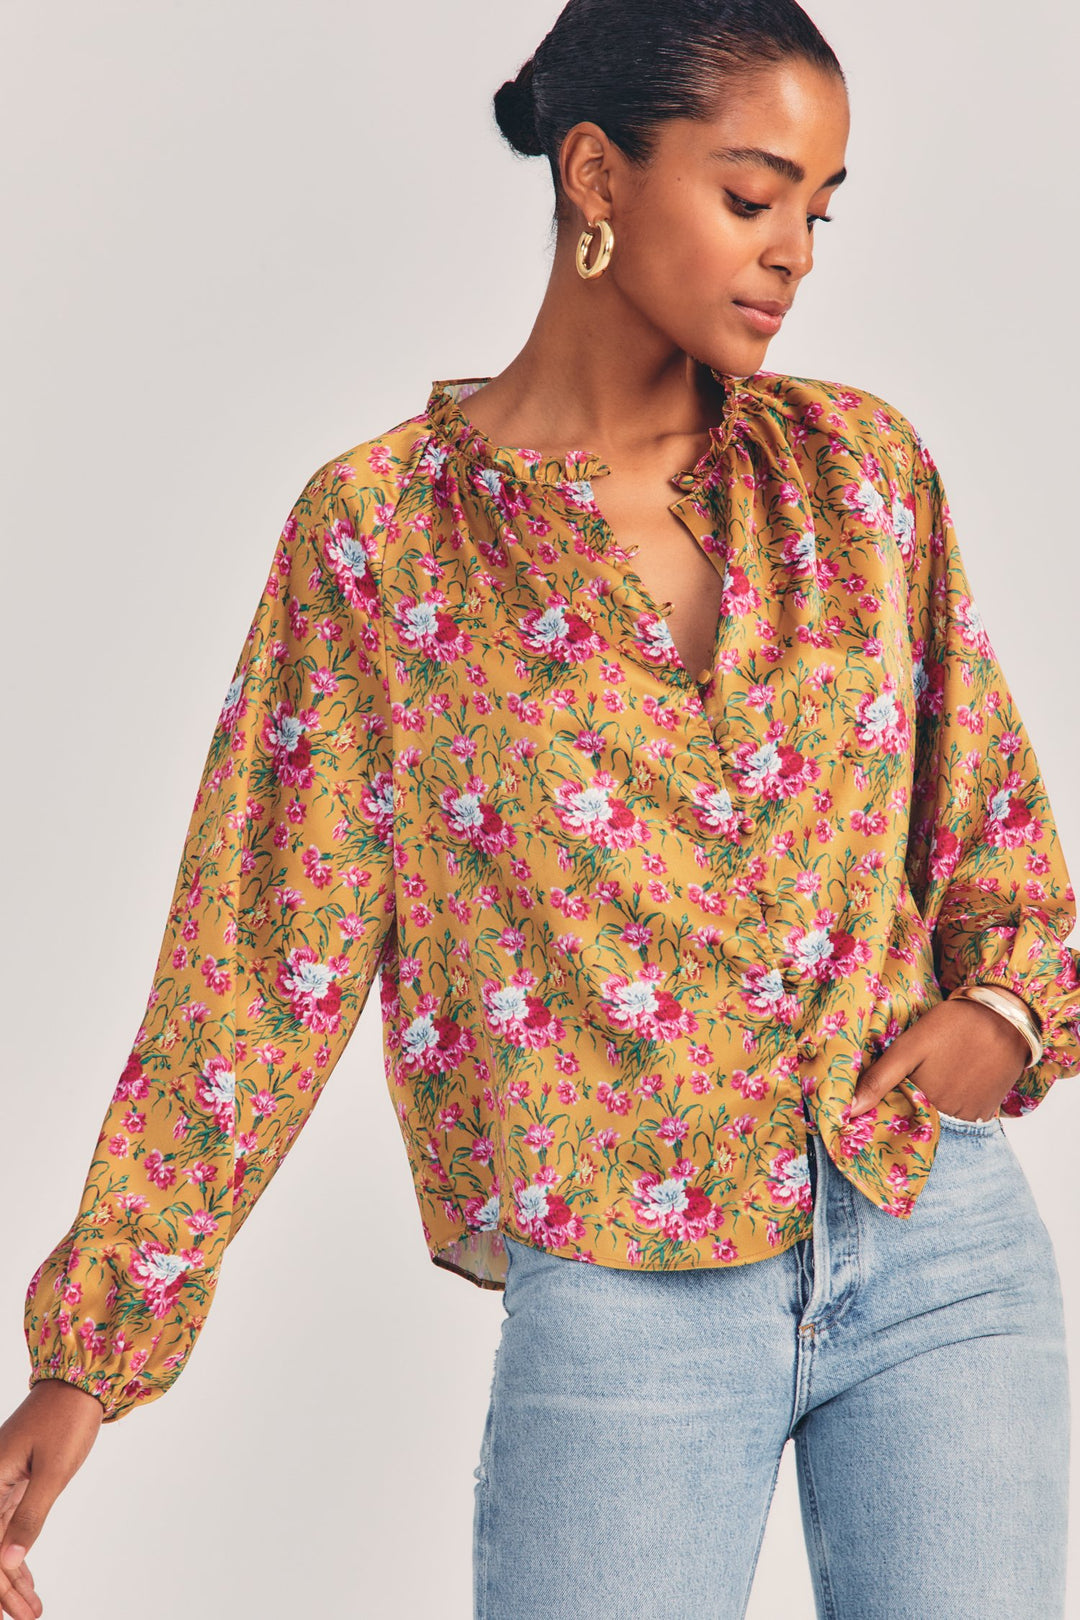 Love Shack Fancy - Manchester Blouse in Ruby Goldmine